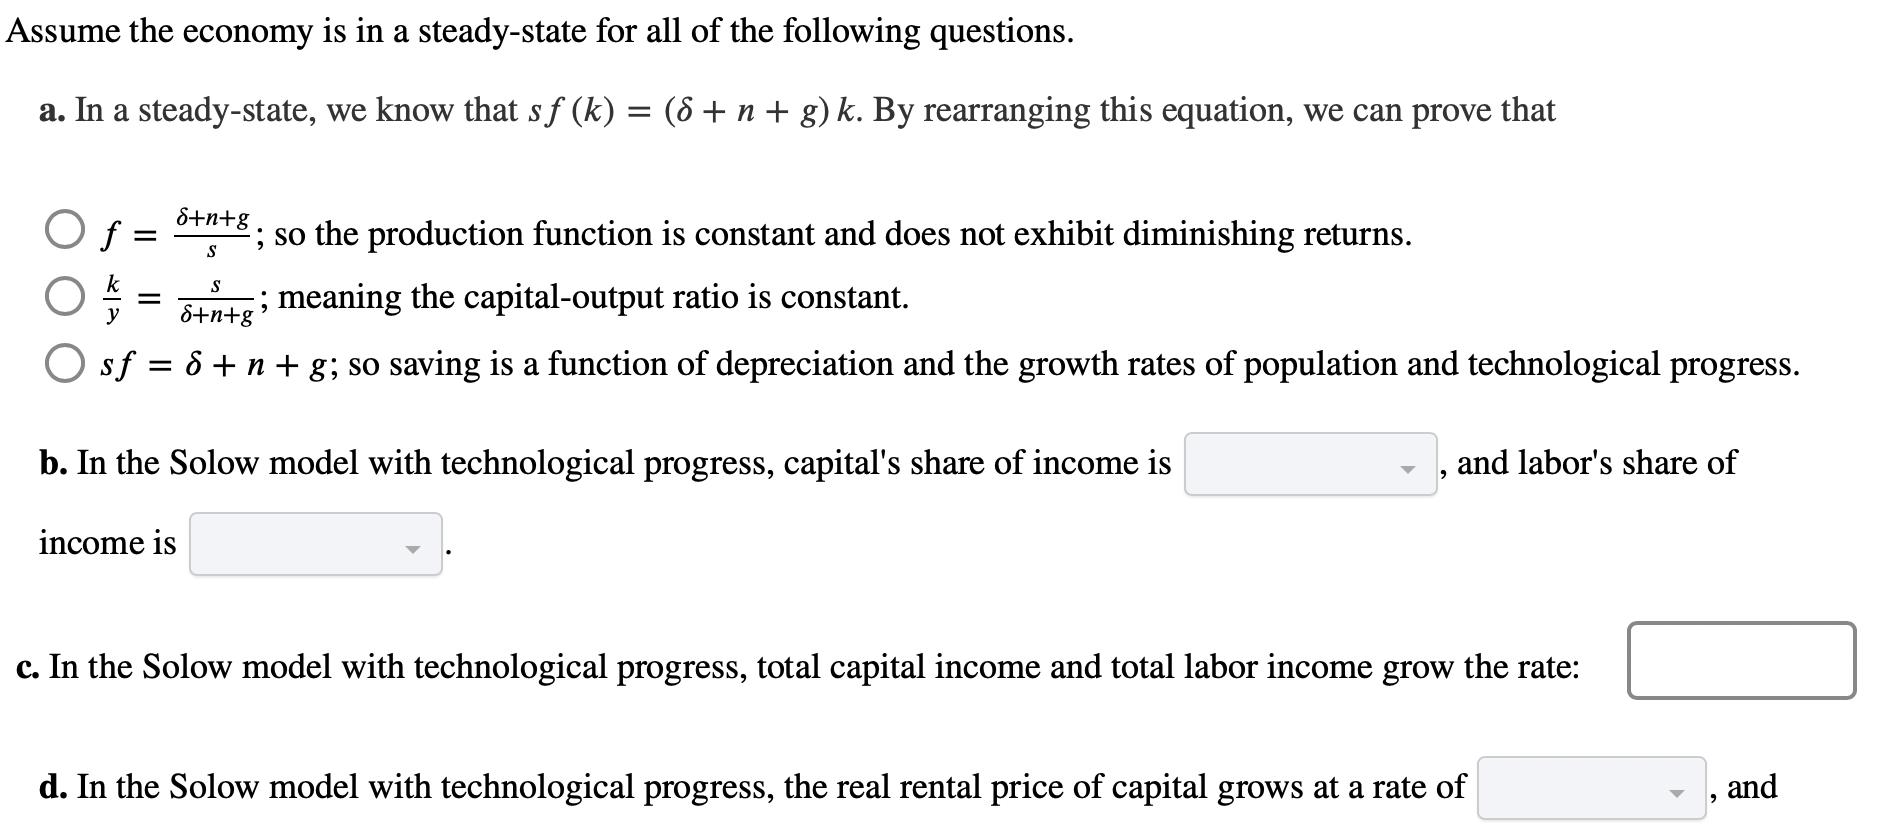 Assume the economy is in a steady-state for all of the following questions. a. In a steady-state, we know